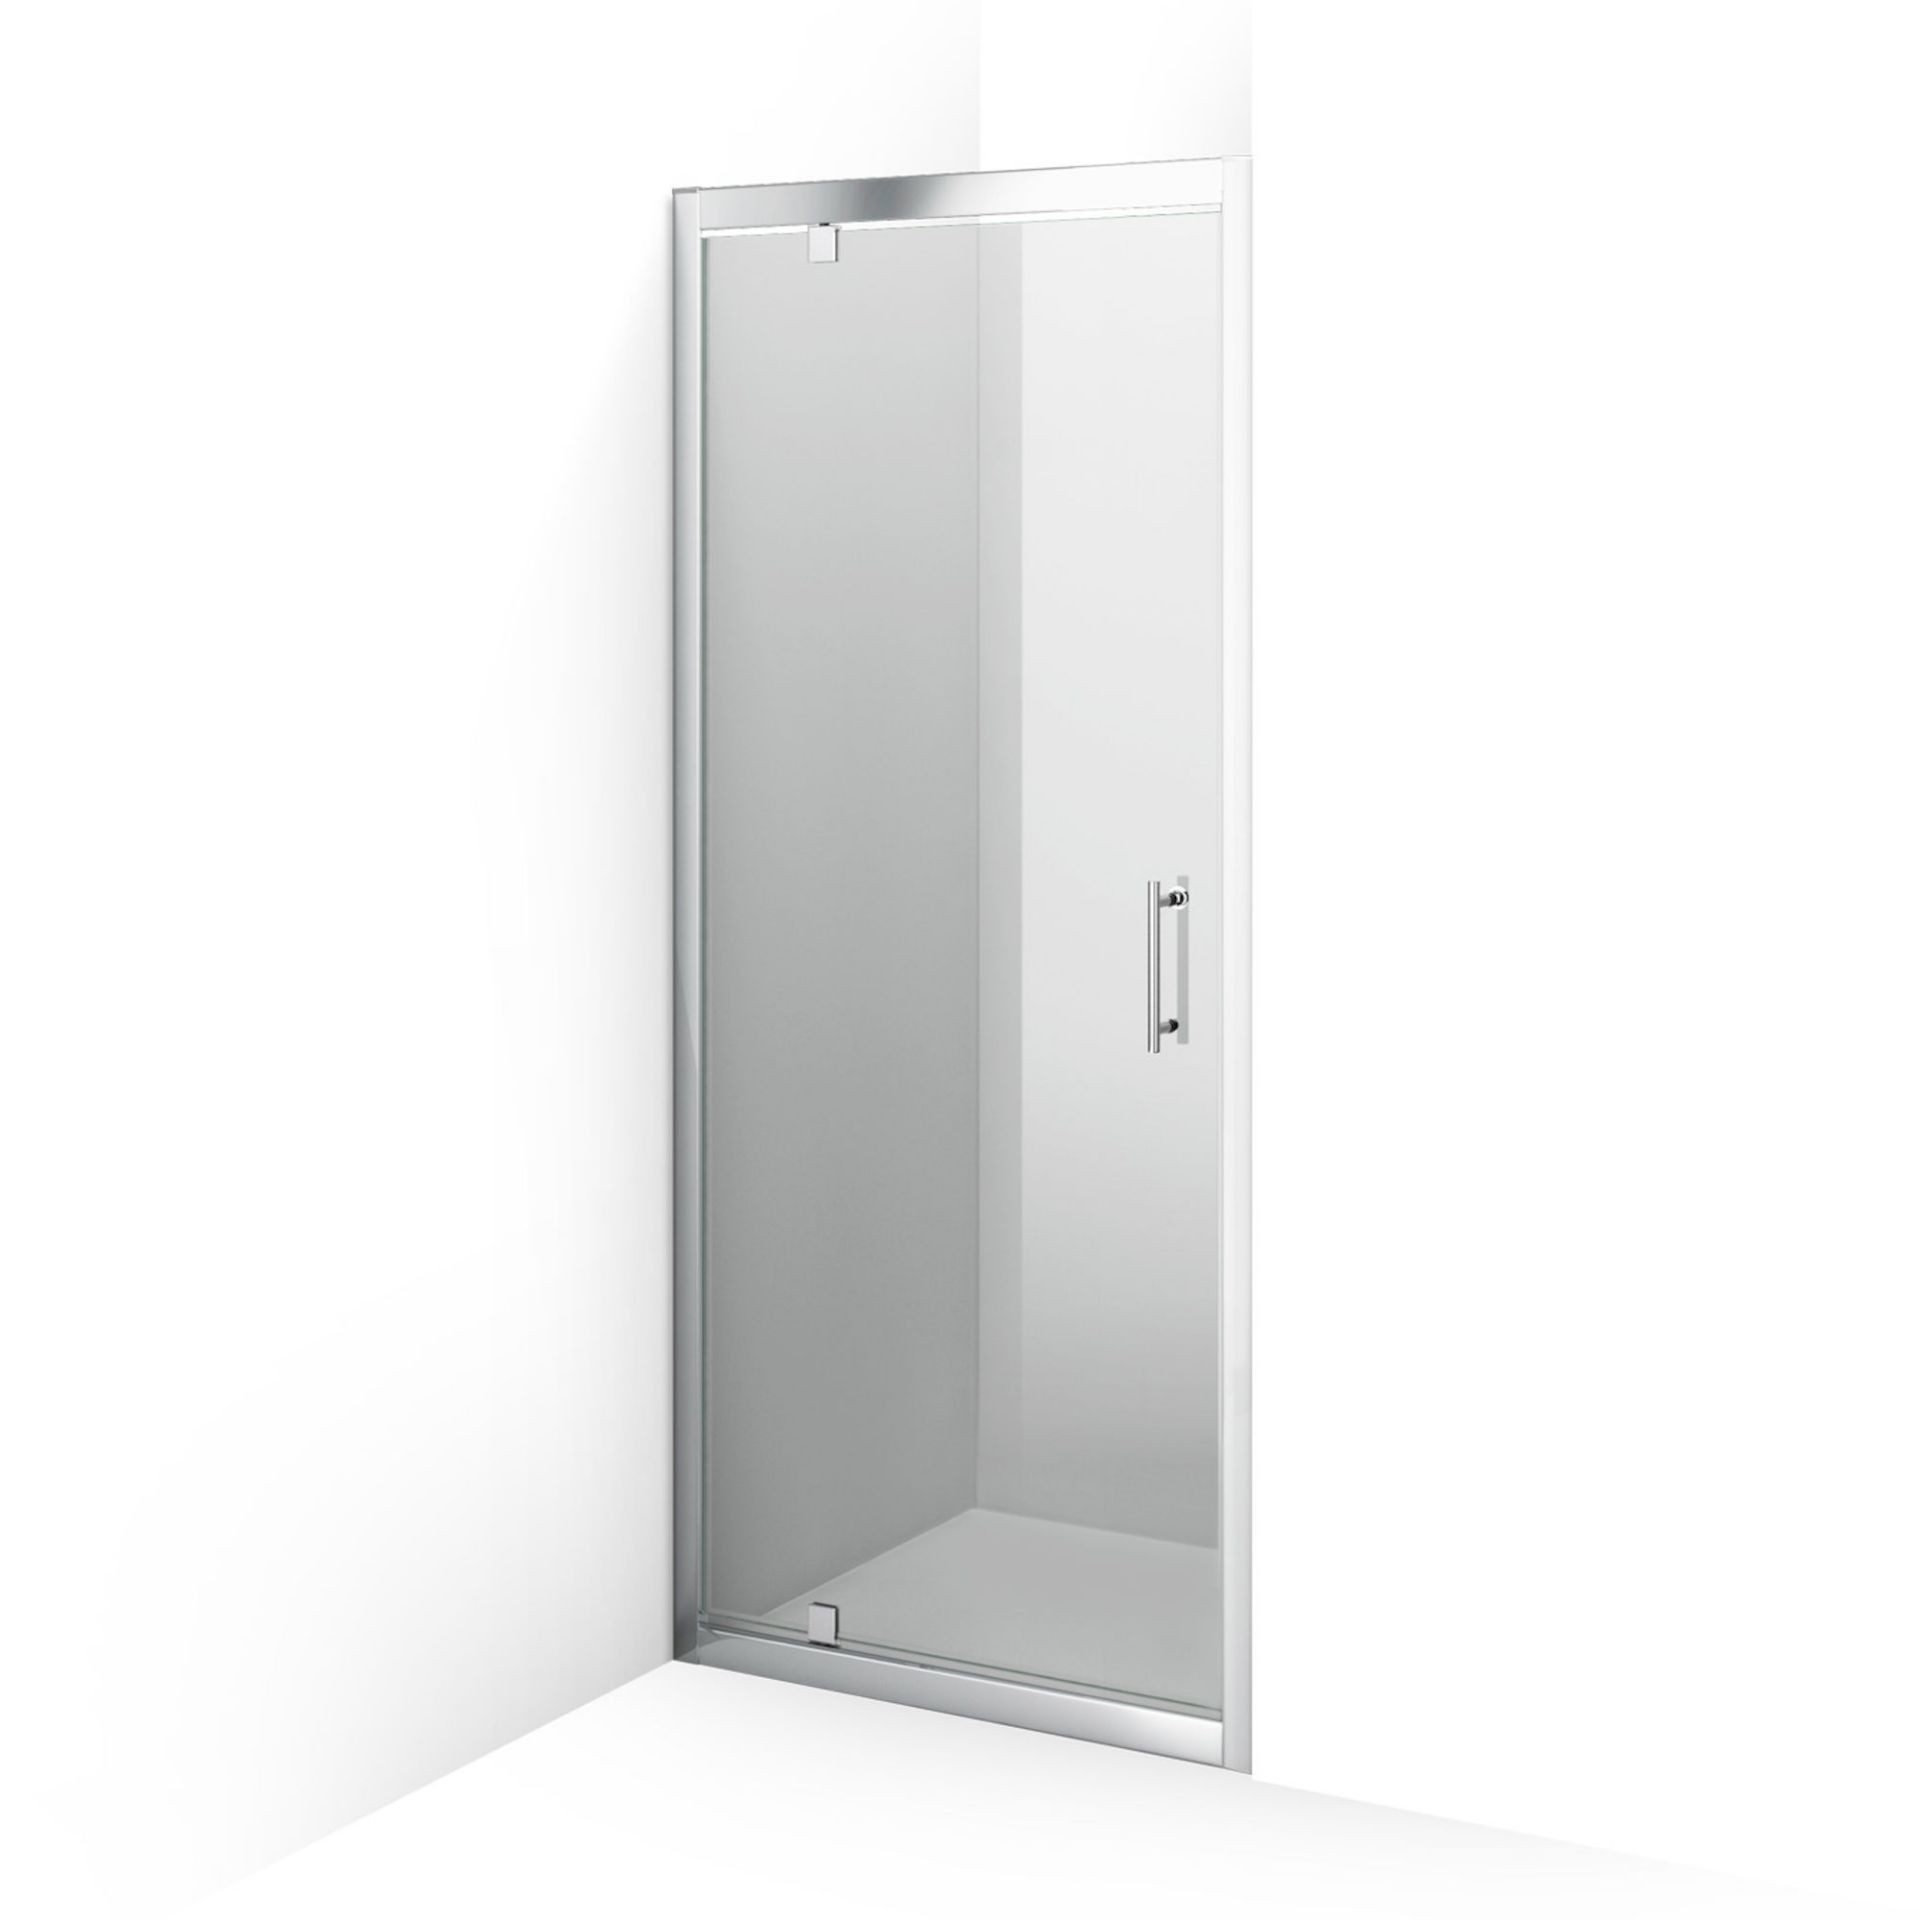 (VN27) 900mm - 6mm - Elements Pivot Shower Door. RRP £299.99. 6mm Safety Glass Fully waterproof - Image 5 of 5